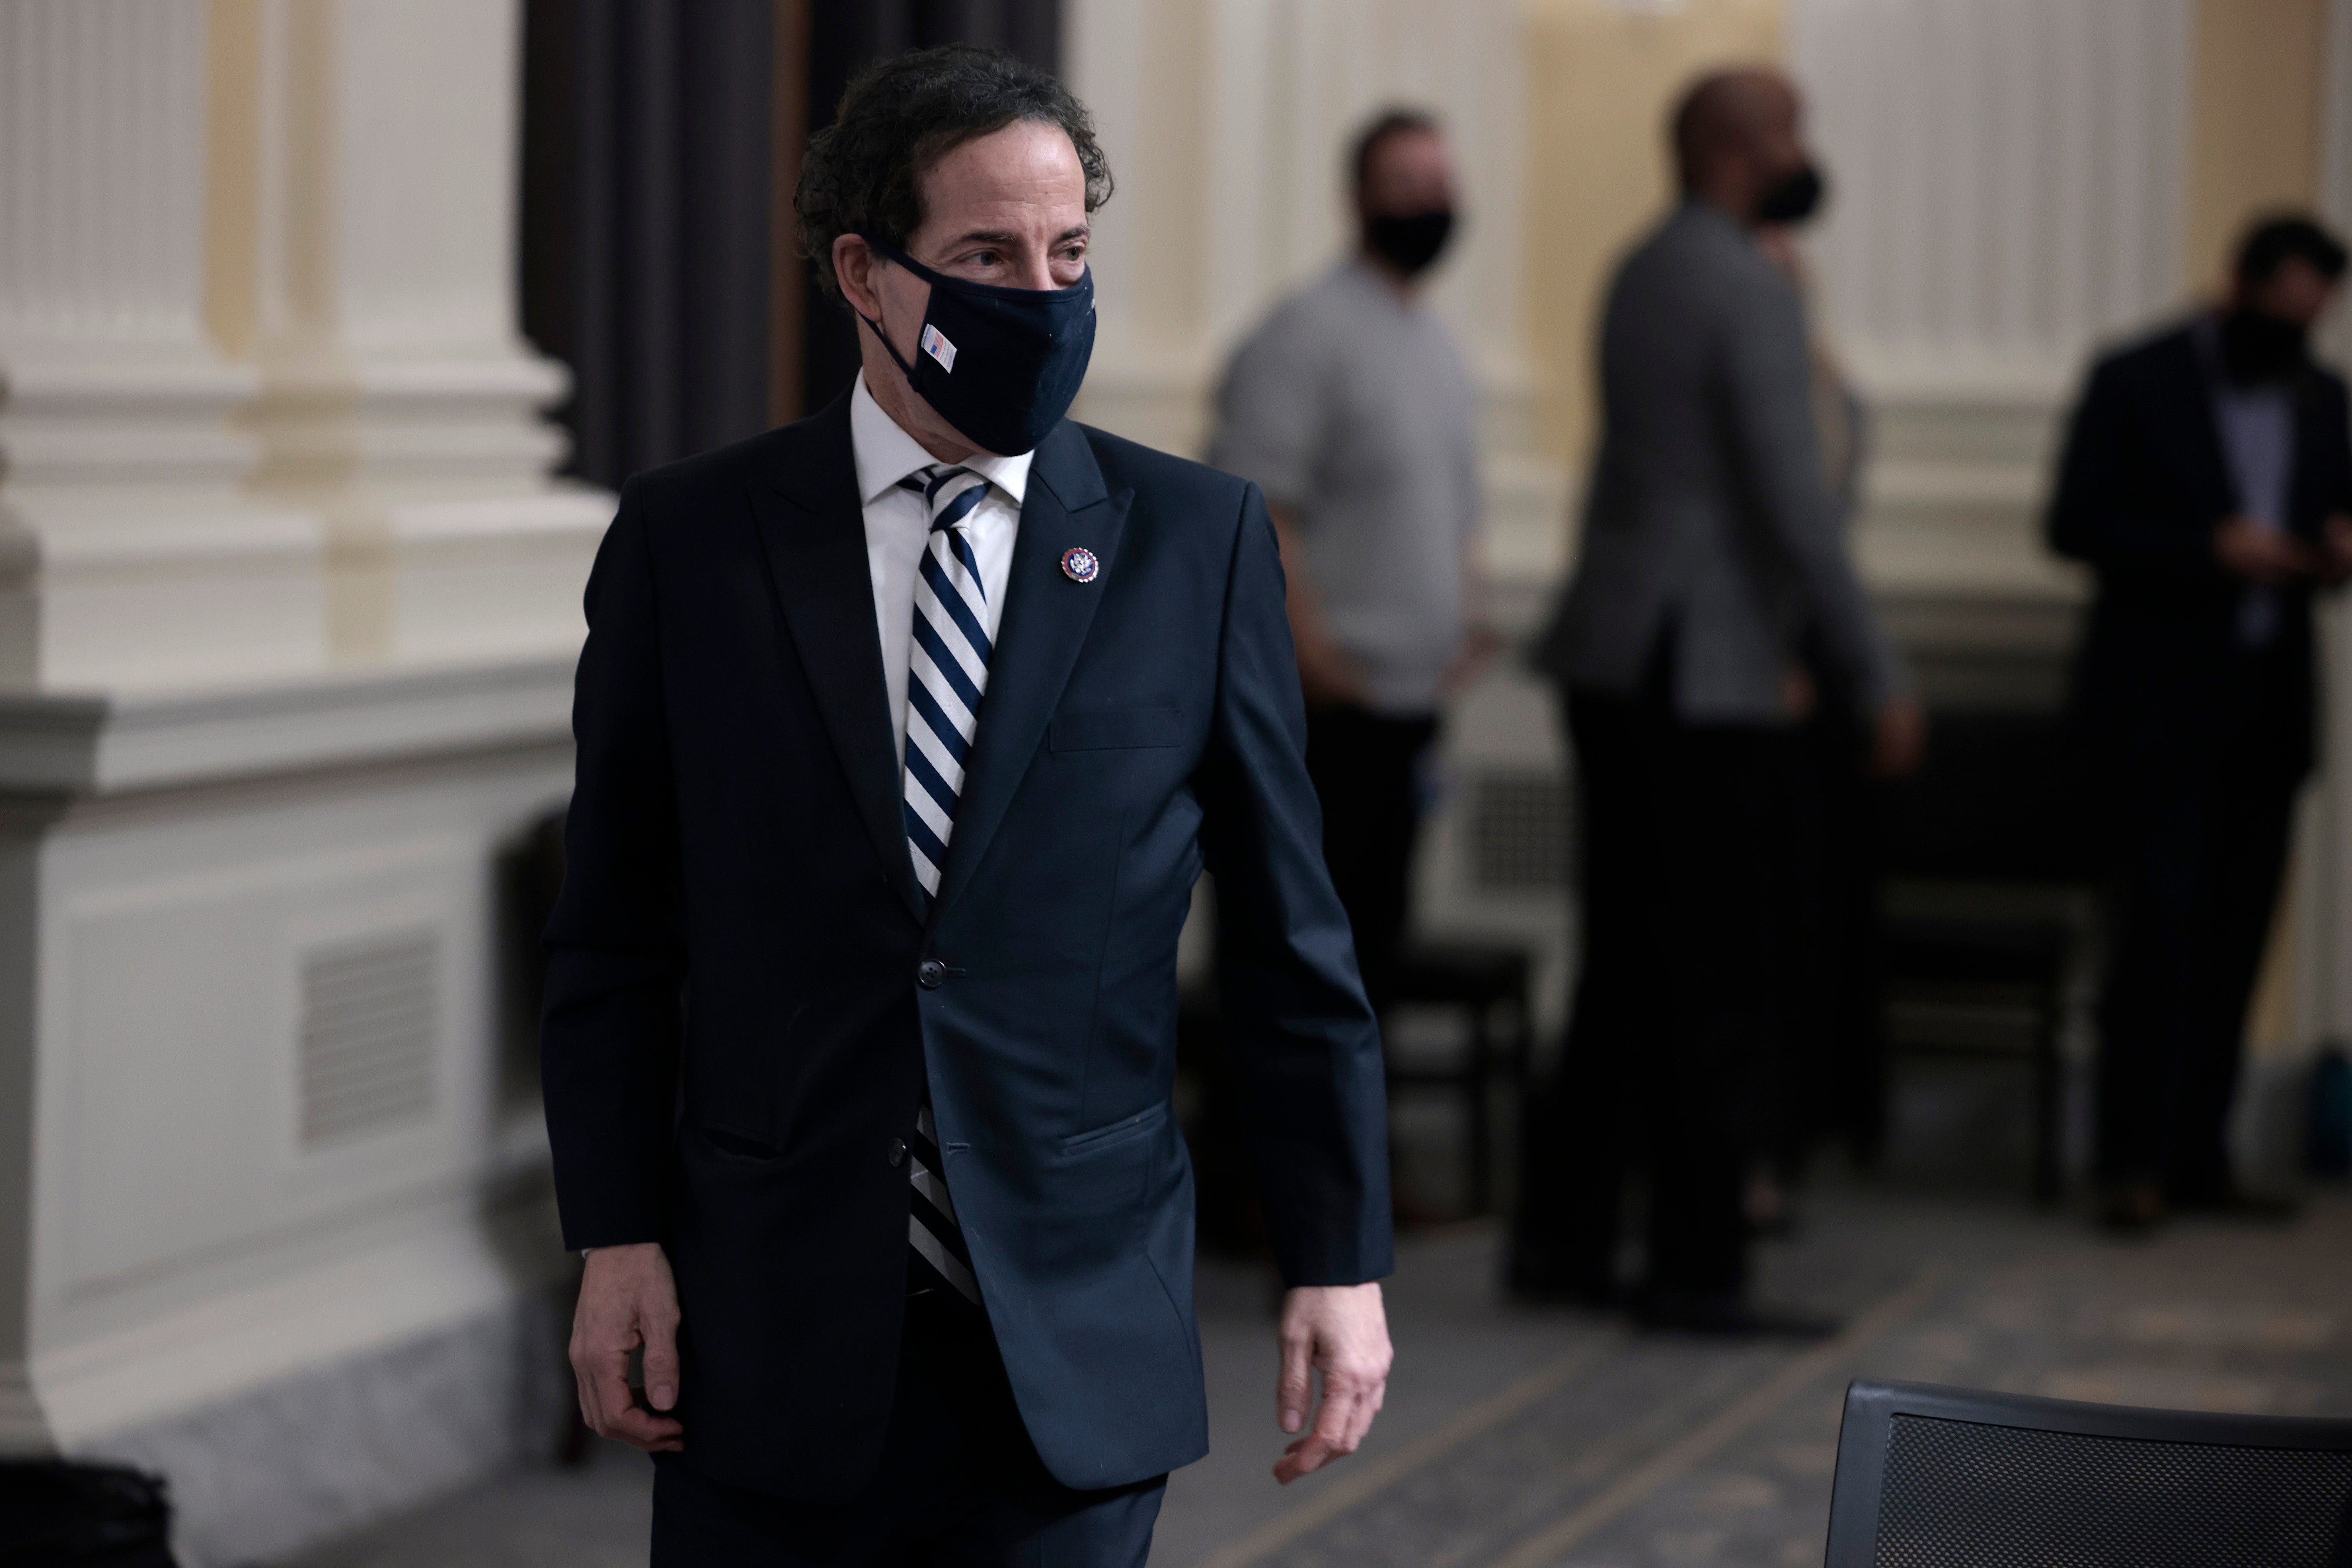 Rep Jamie Raskin (D-MD) arrives at a business meeting with the select committee investigating the January 6 attack, on Capitol Hill on 13 December 2021 in Washington, DC.